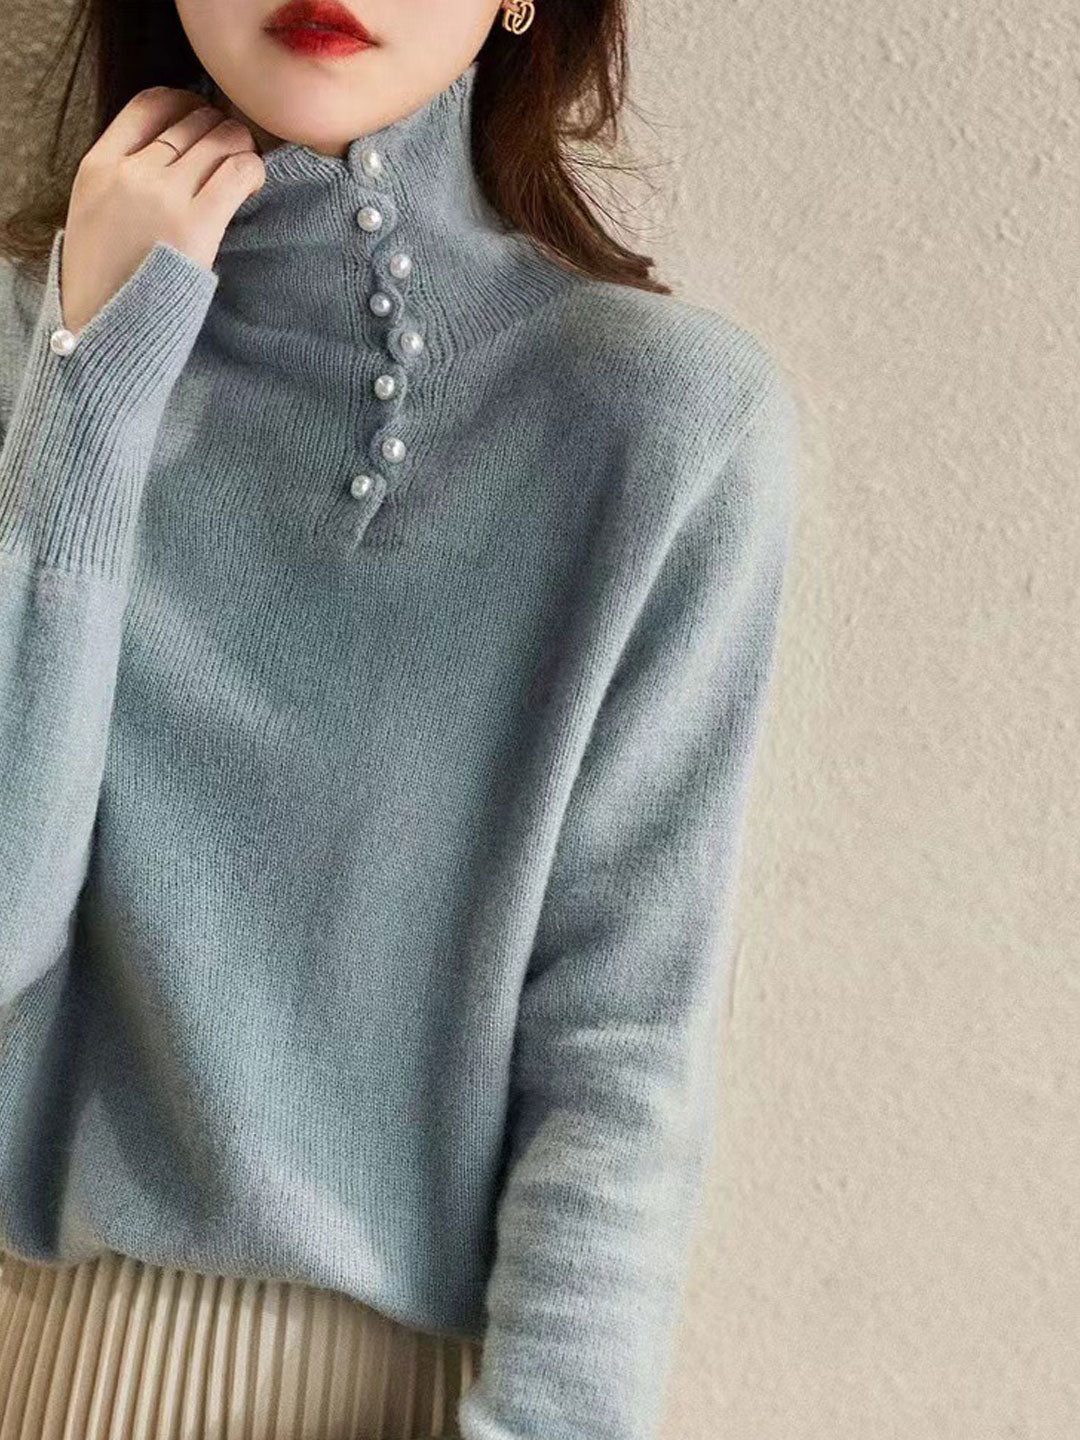 Ava Vintage Buttoned Turtleneck Knitted Sweater